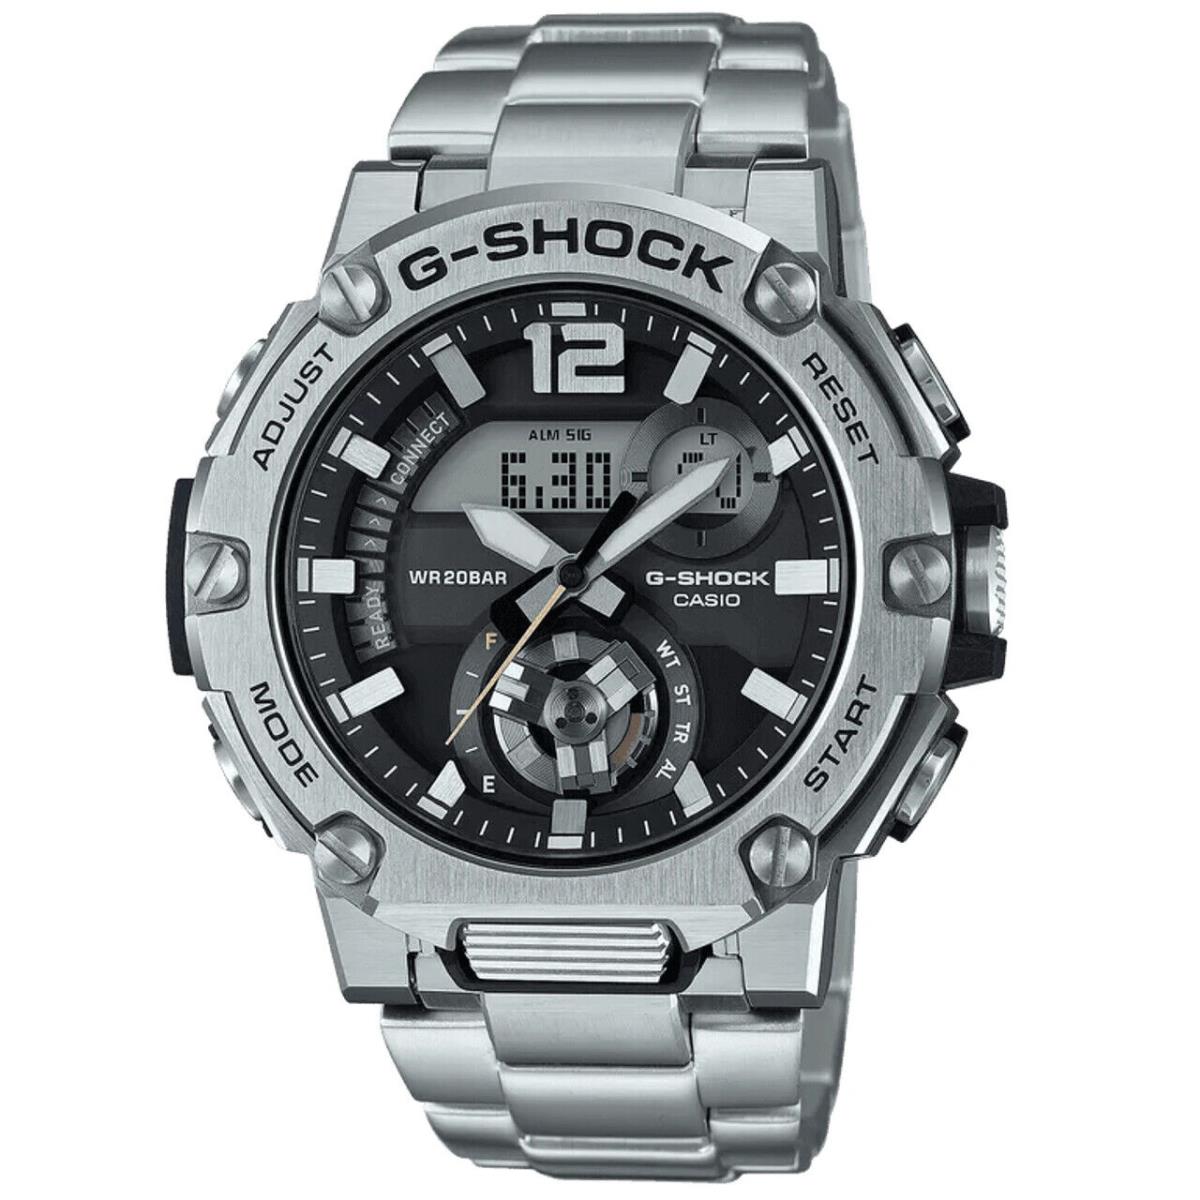 Casio G-shock GSTB300SD-1A 50mm. Bluetooth Solar Dial Stainless Steel Carbon